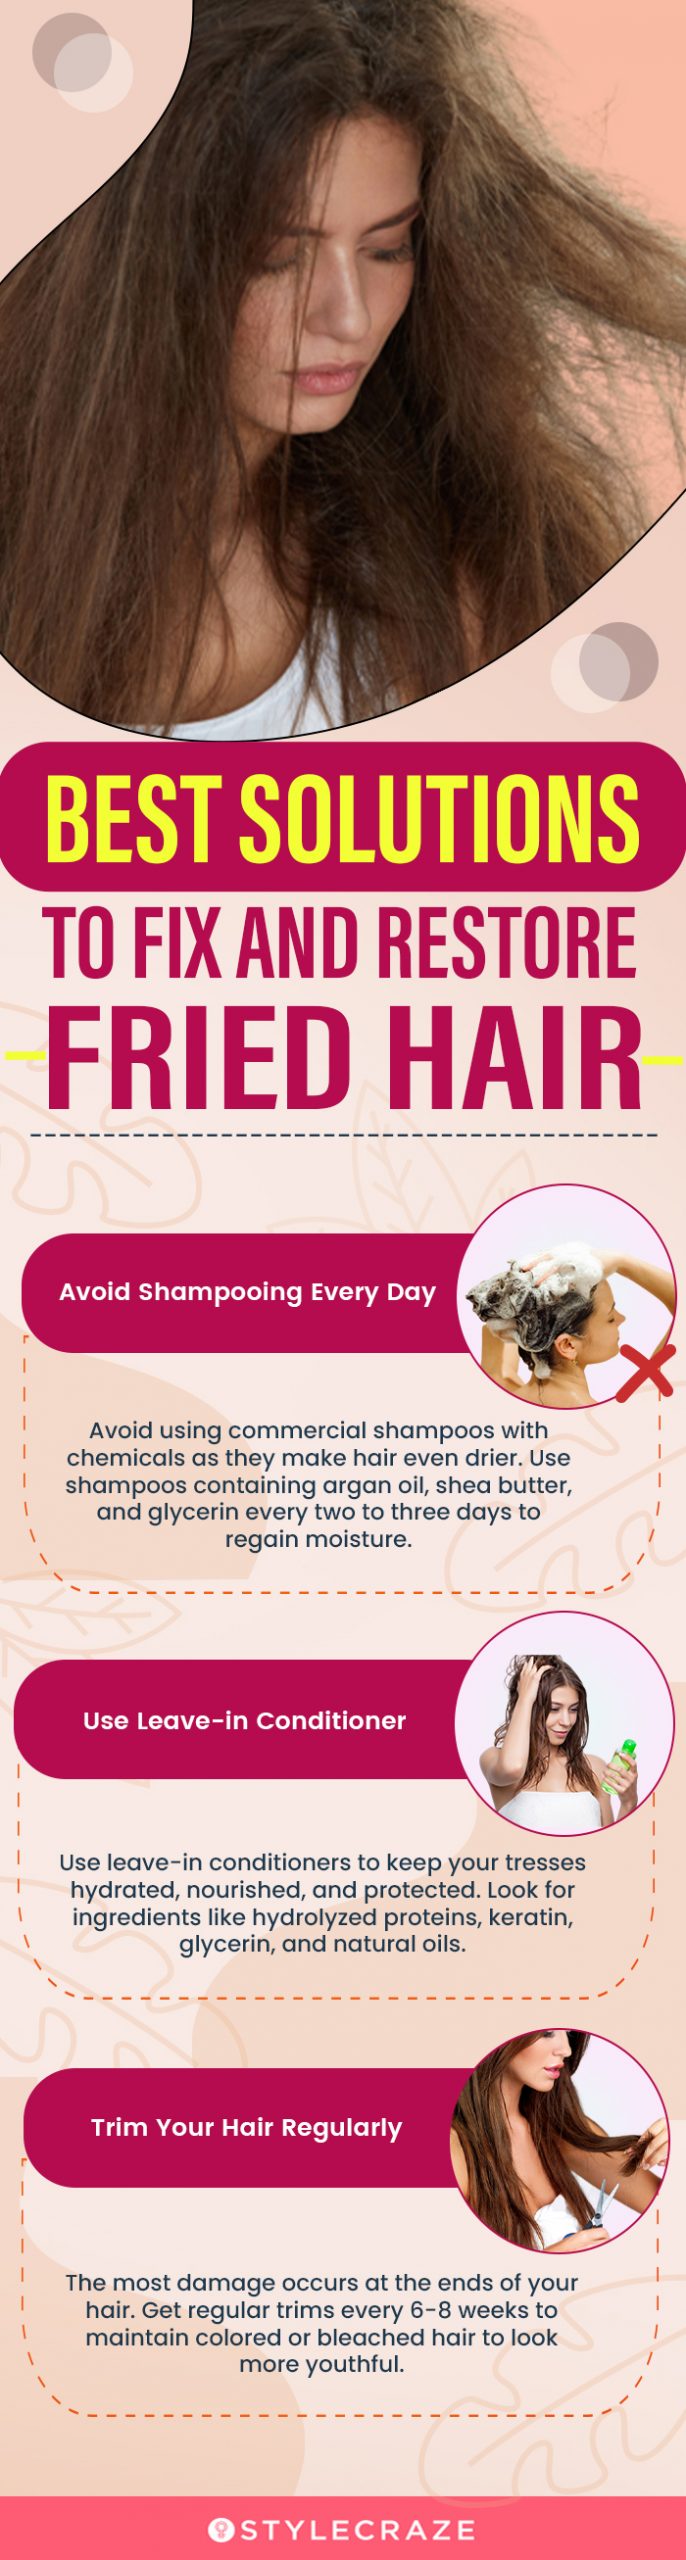 best solutions to fix and restore fried hair [infographic]